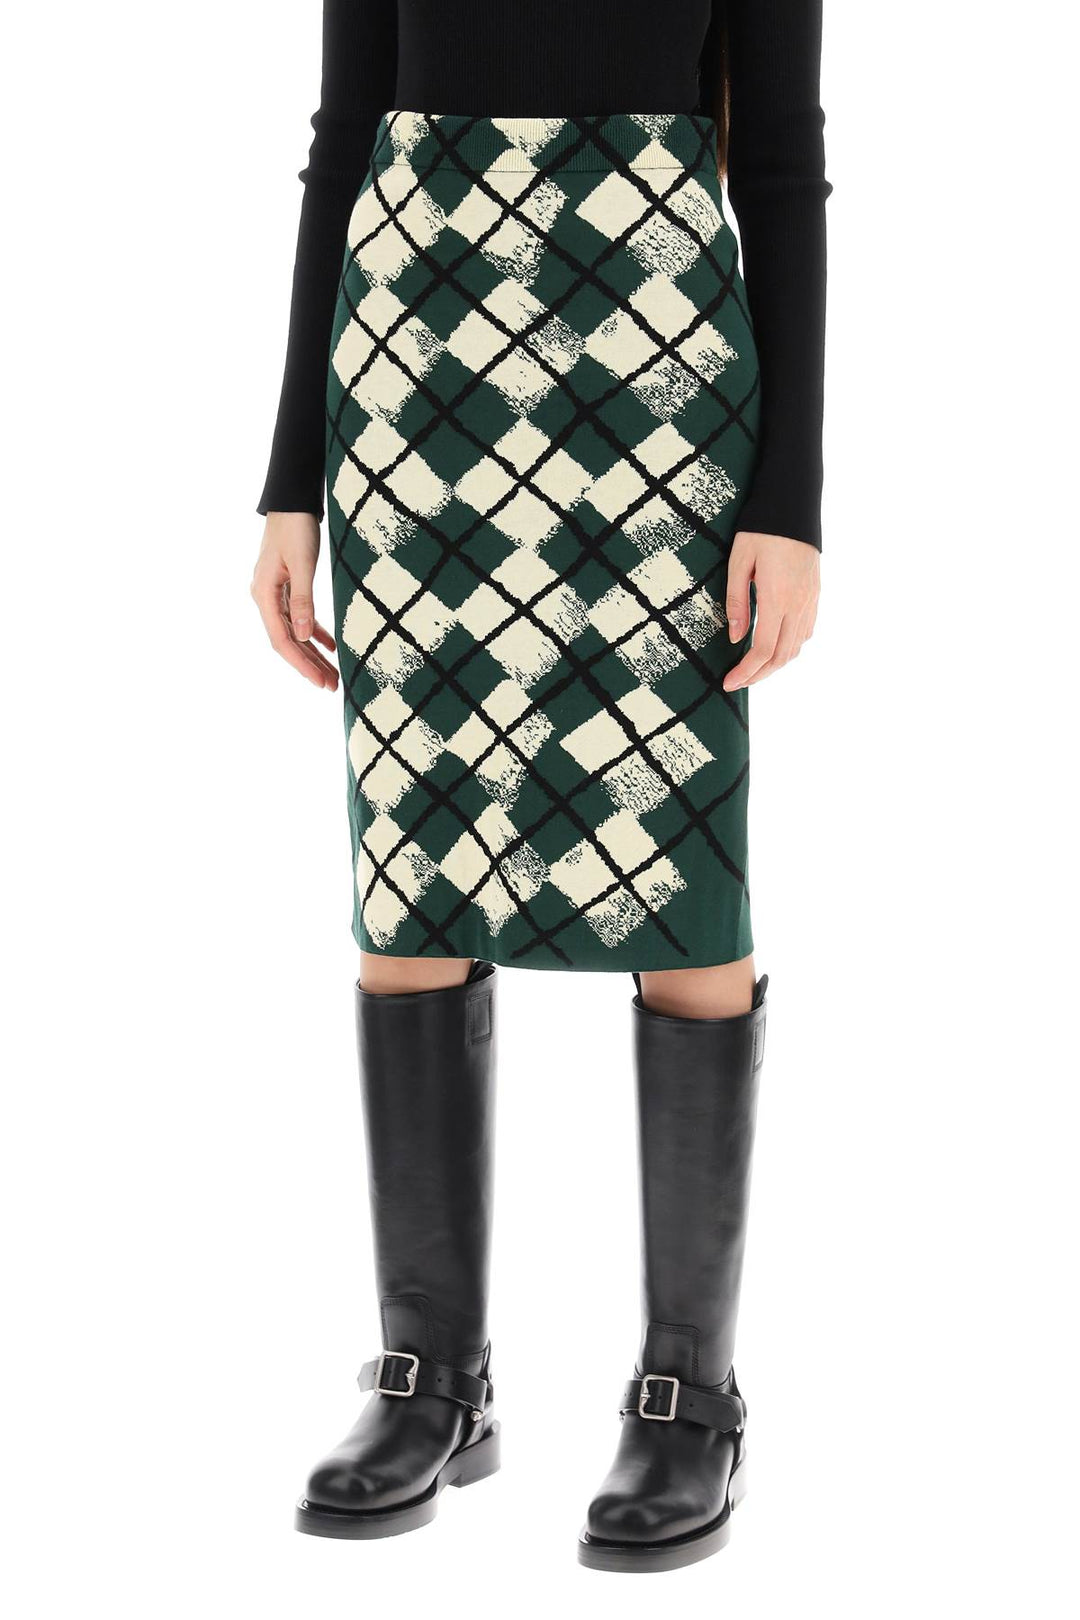 Burberry Replace With Double Quoteknitted Diamond Pattern Midi Skirt   Verde